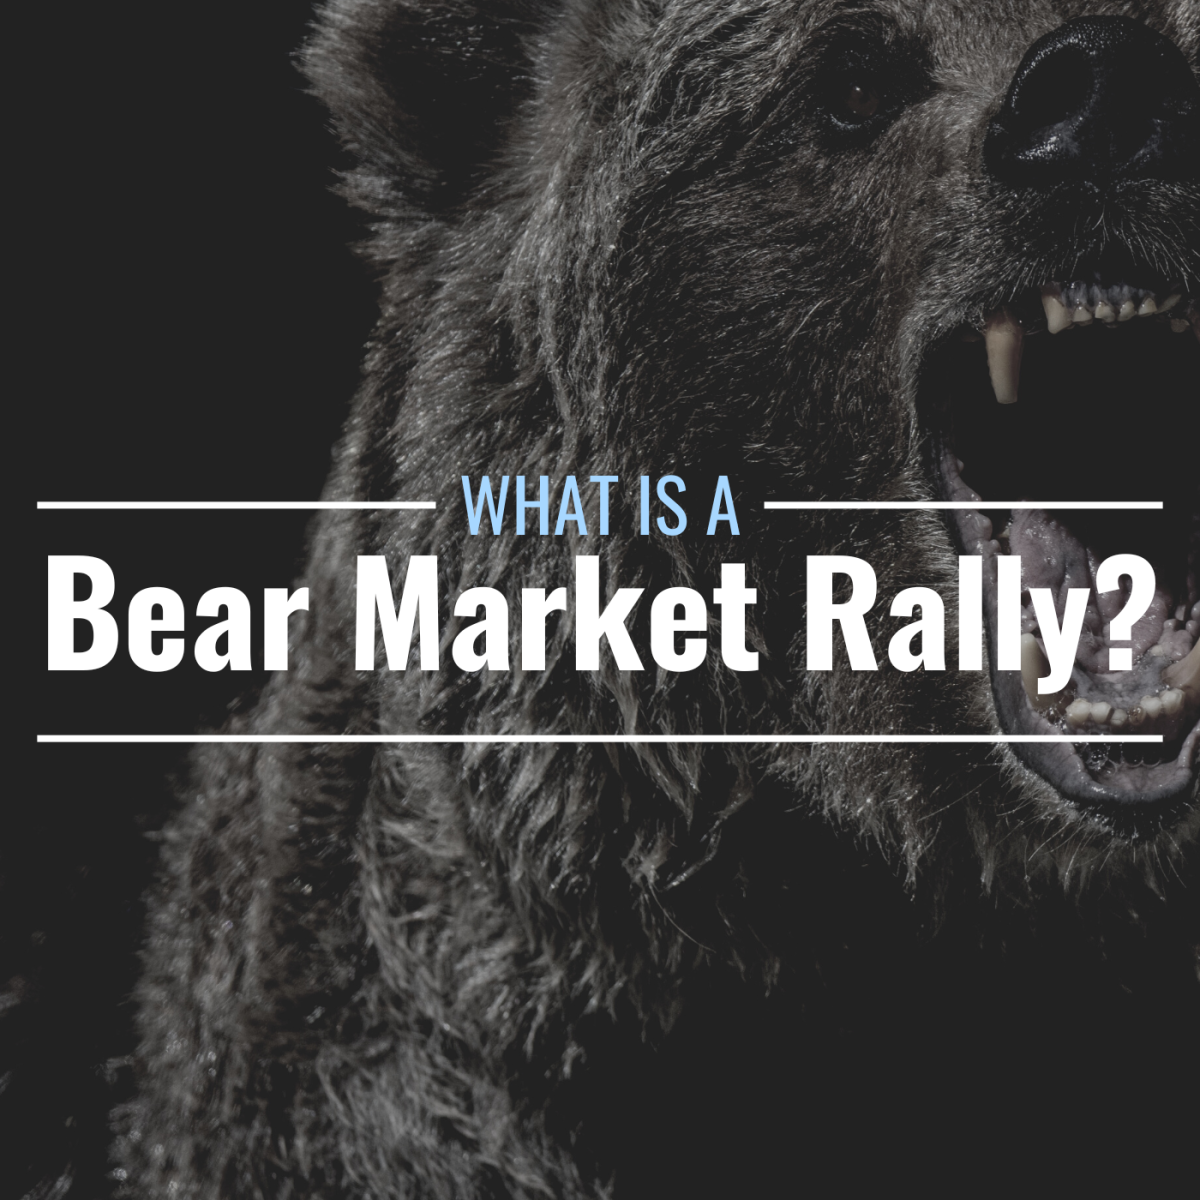 Darkened cropped photo of a snarling bear with text overlay that reads "What Is a Bear Market Rally?"